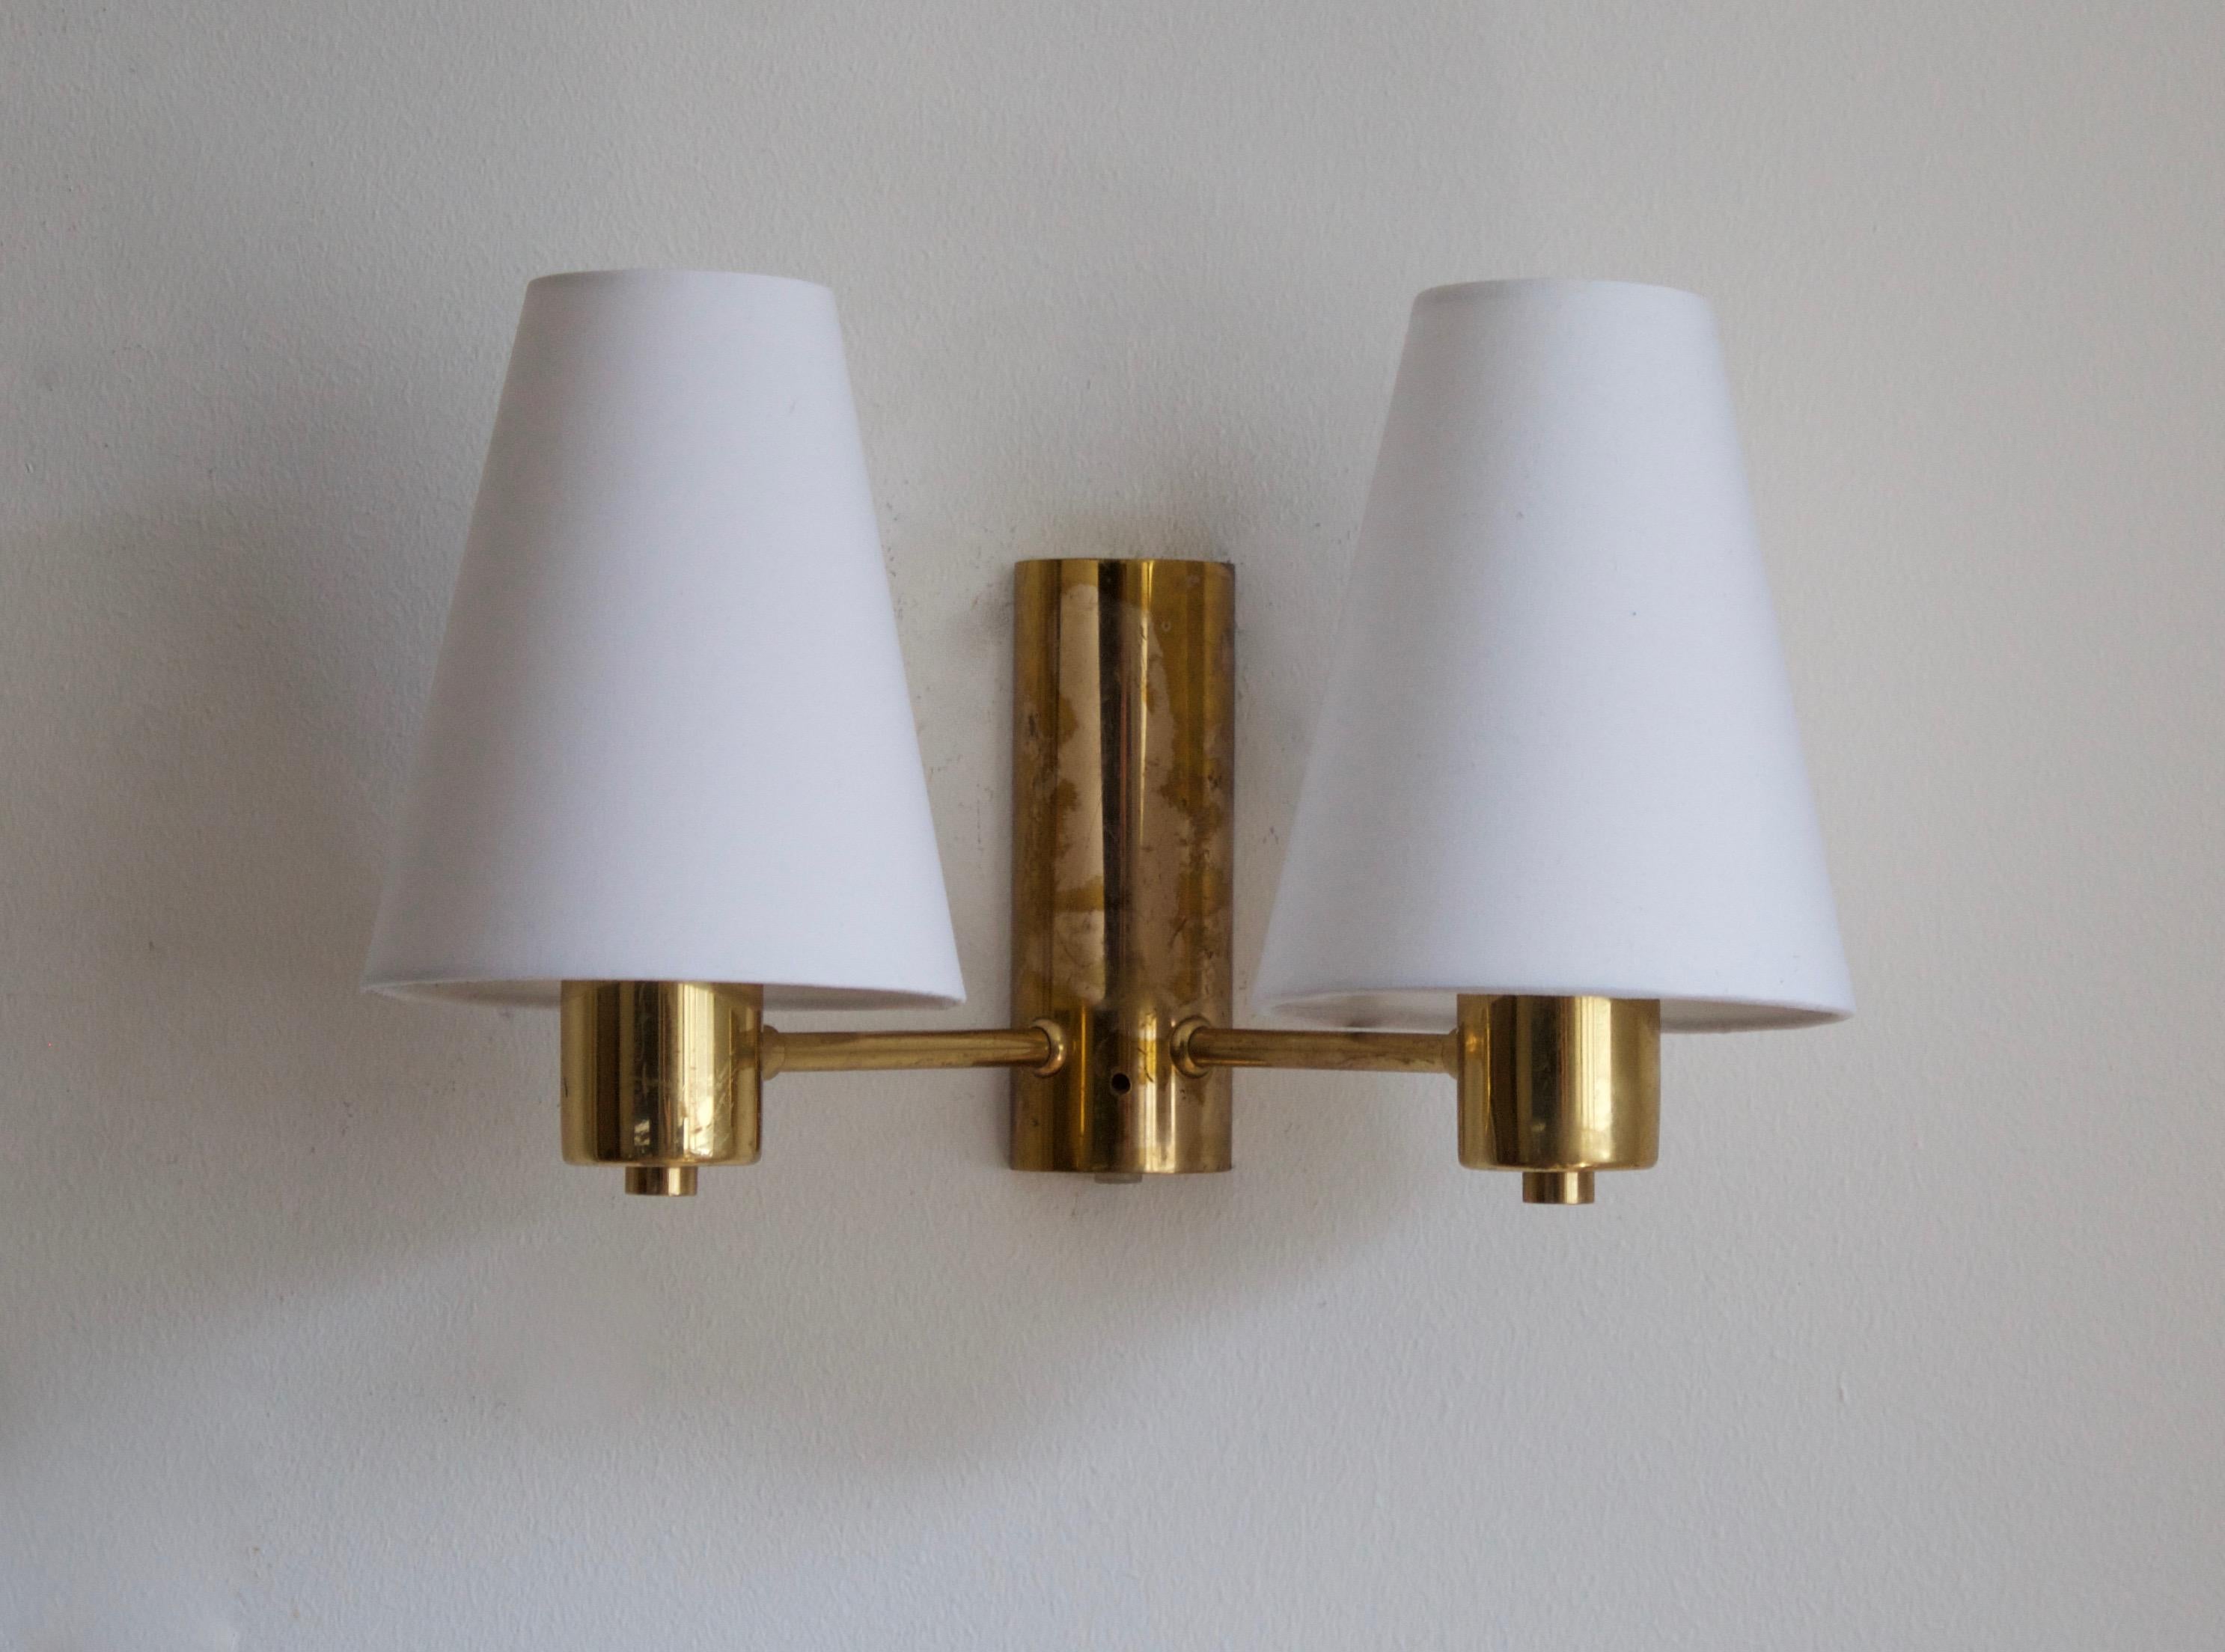 A two armed wall light. designed and produced in Sweden, 1950s. Brand new lampshades.

Stated dimensions with lampshade attached. Dimensions variable.